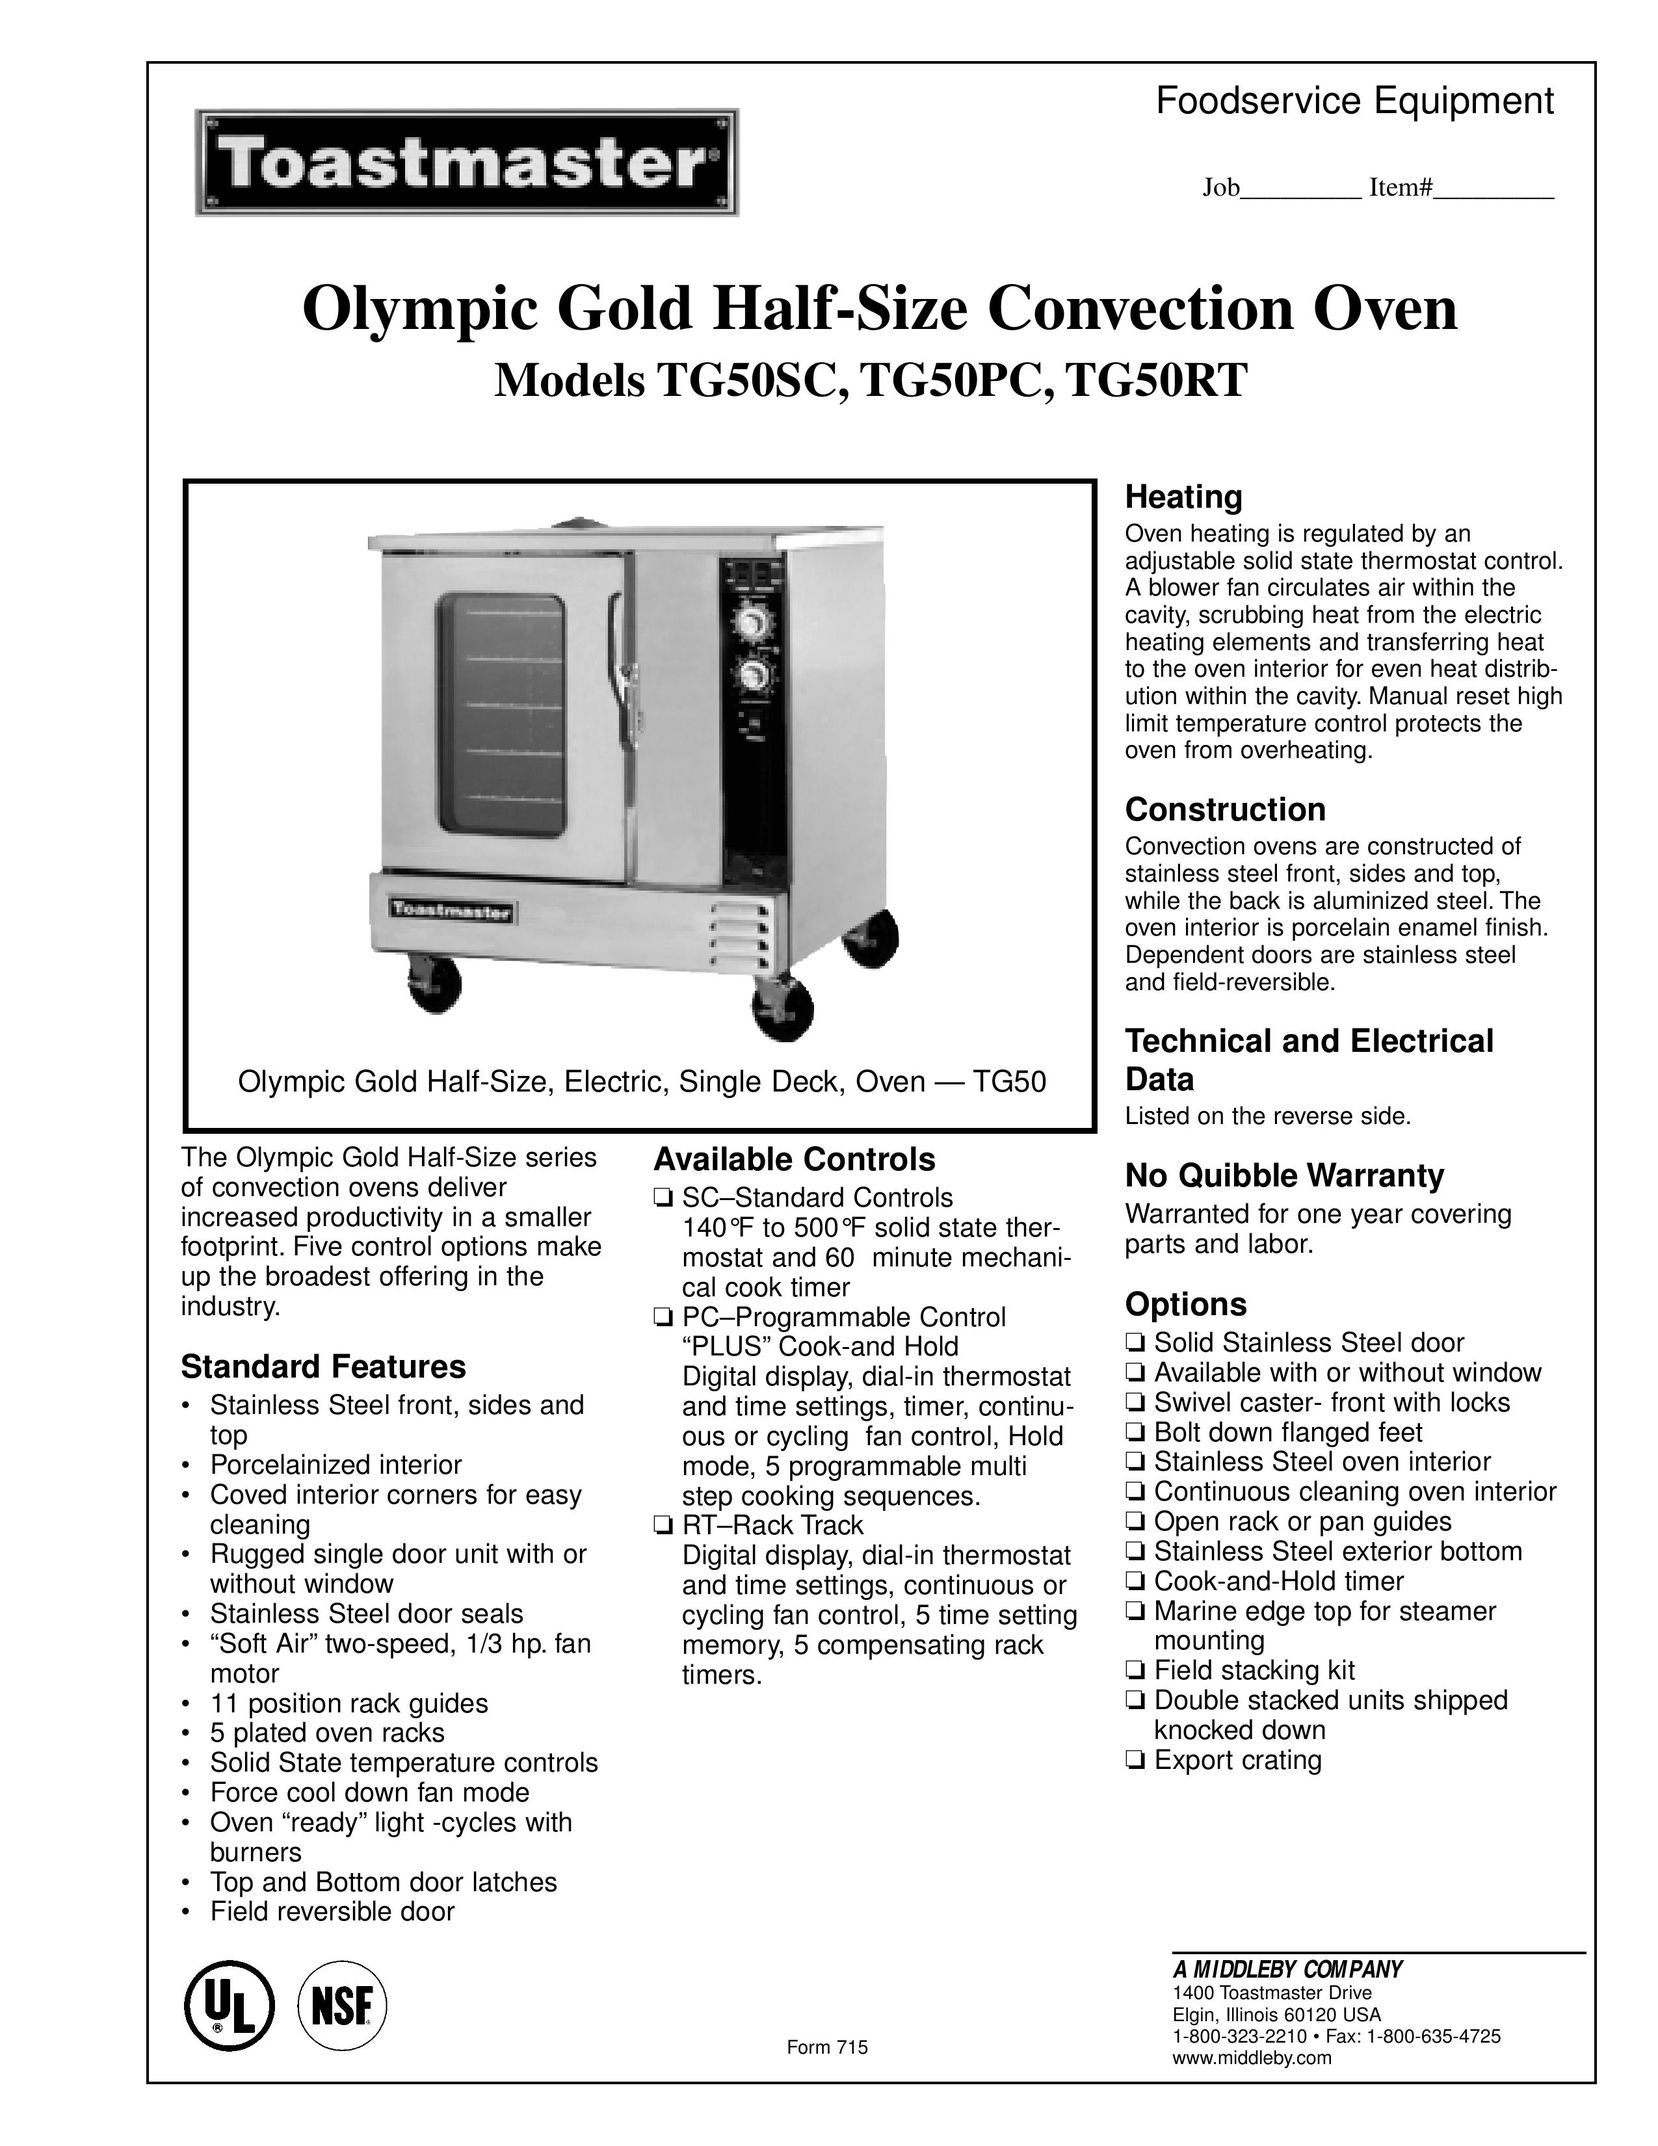 Toastmaster TG50RT Convection Oven User Manual